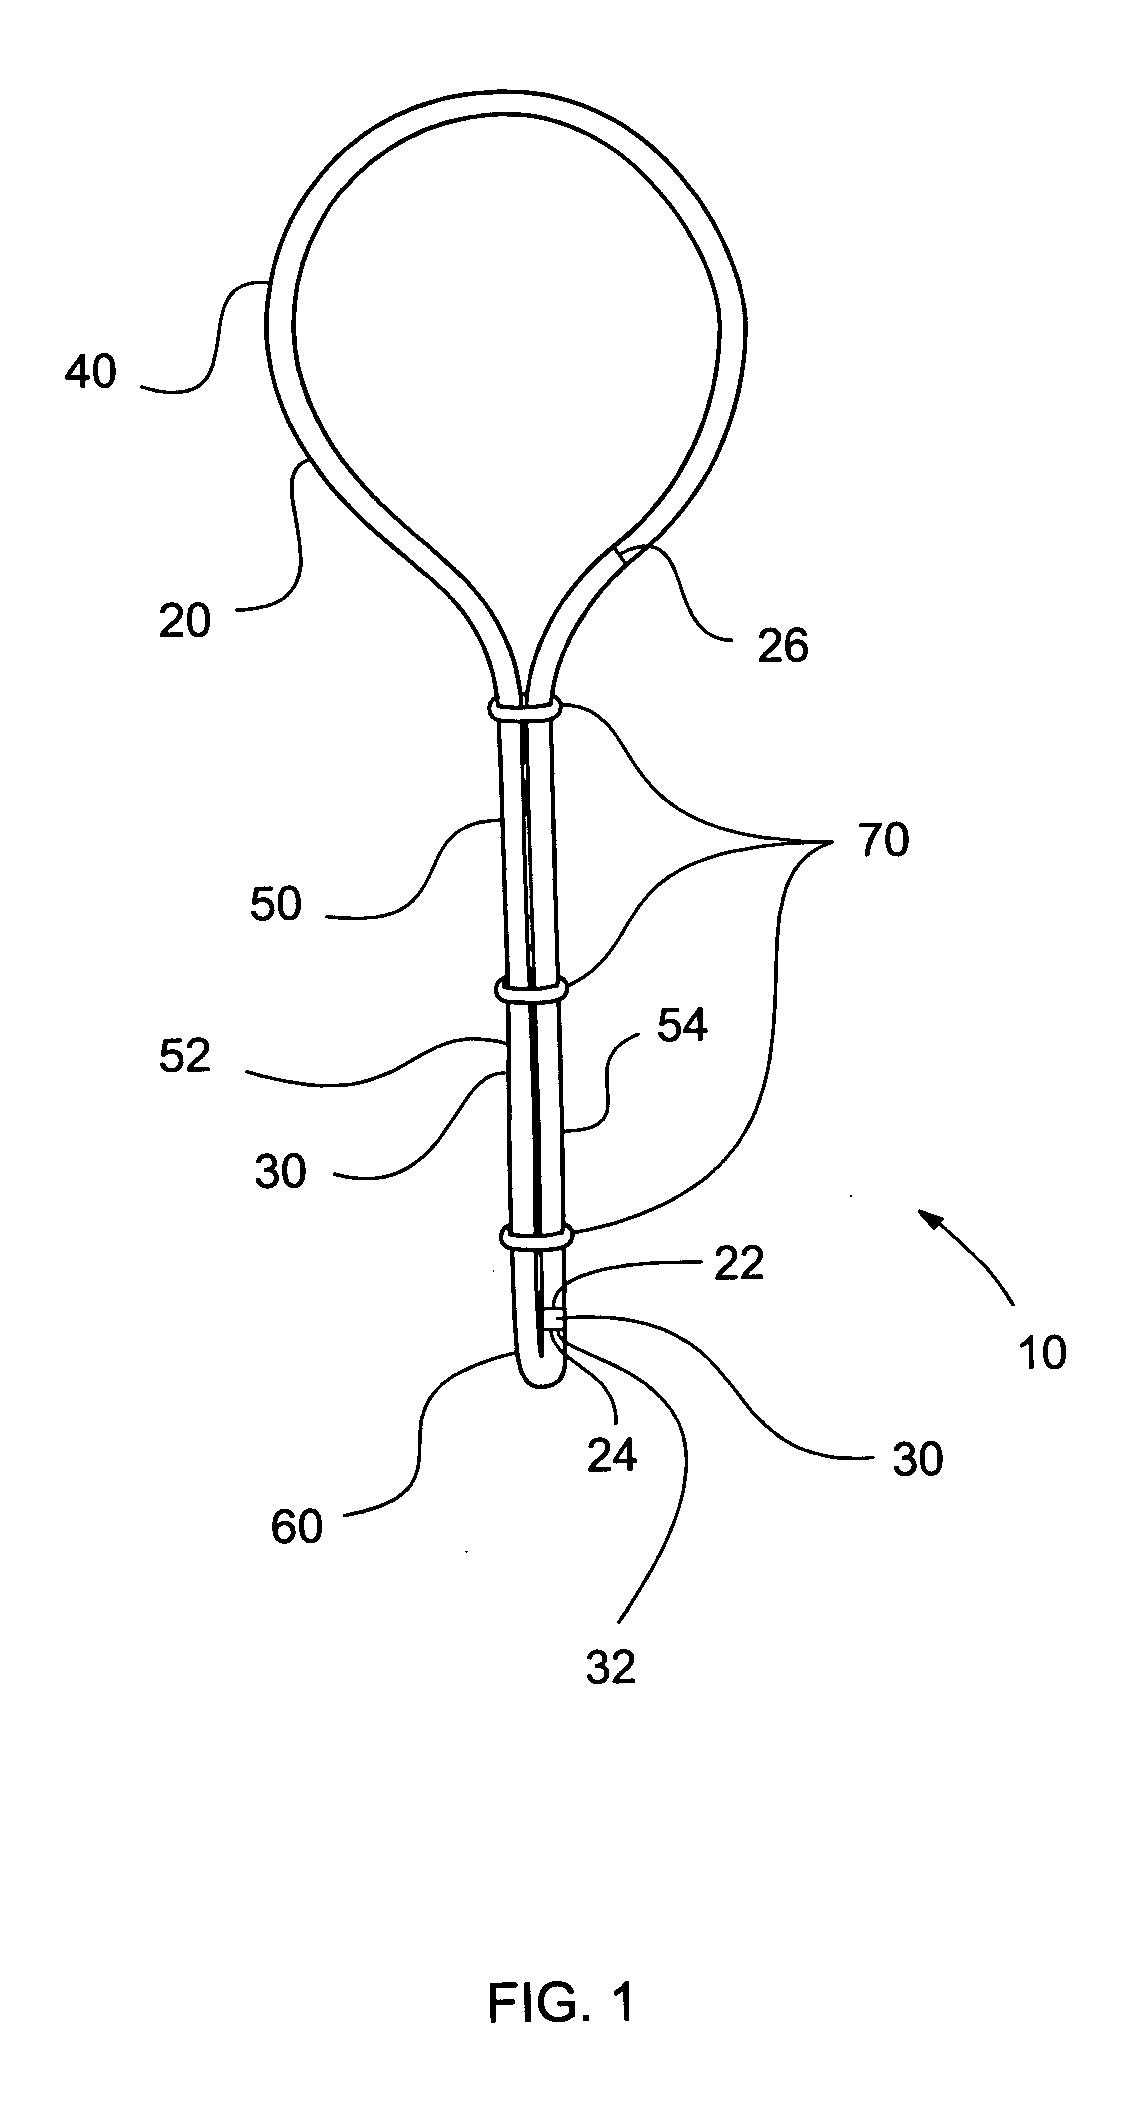 Device and method for supporting wound drainage systems